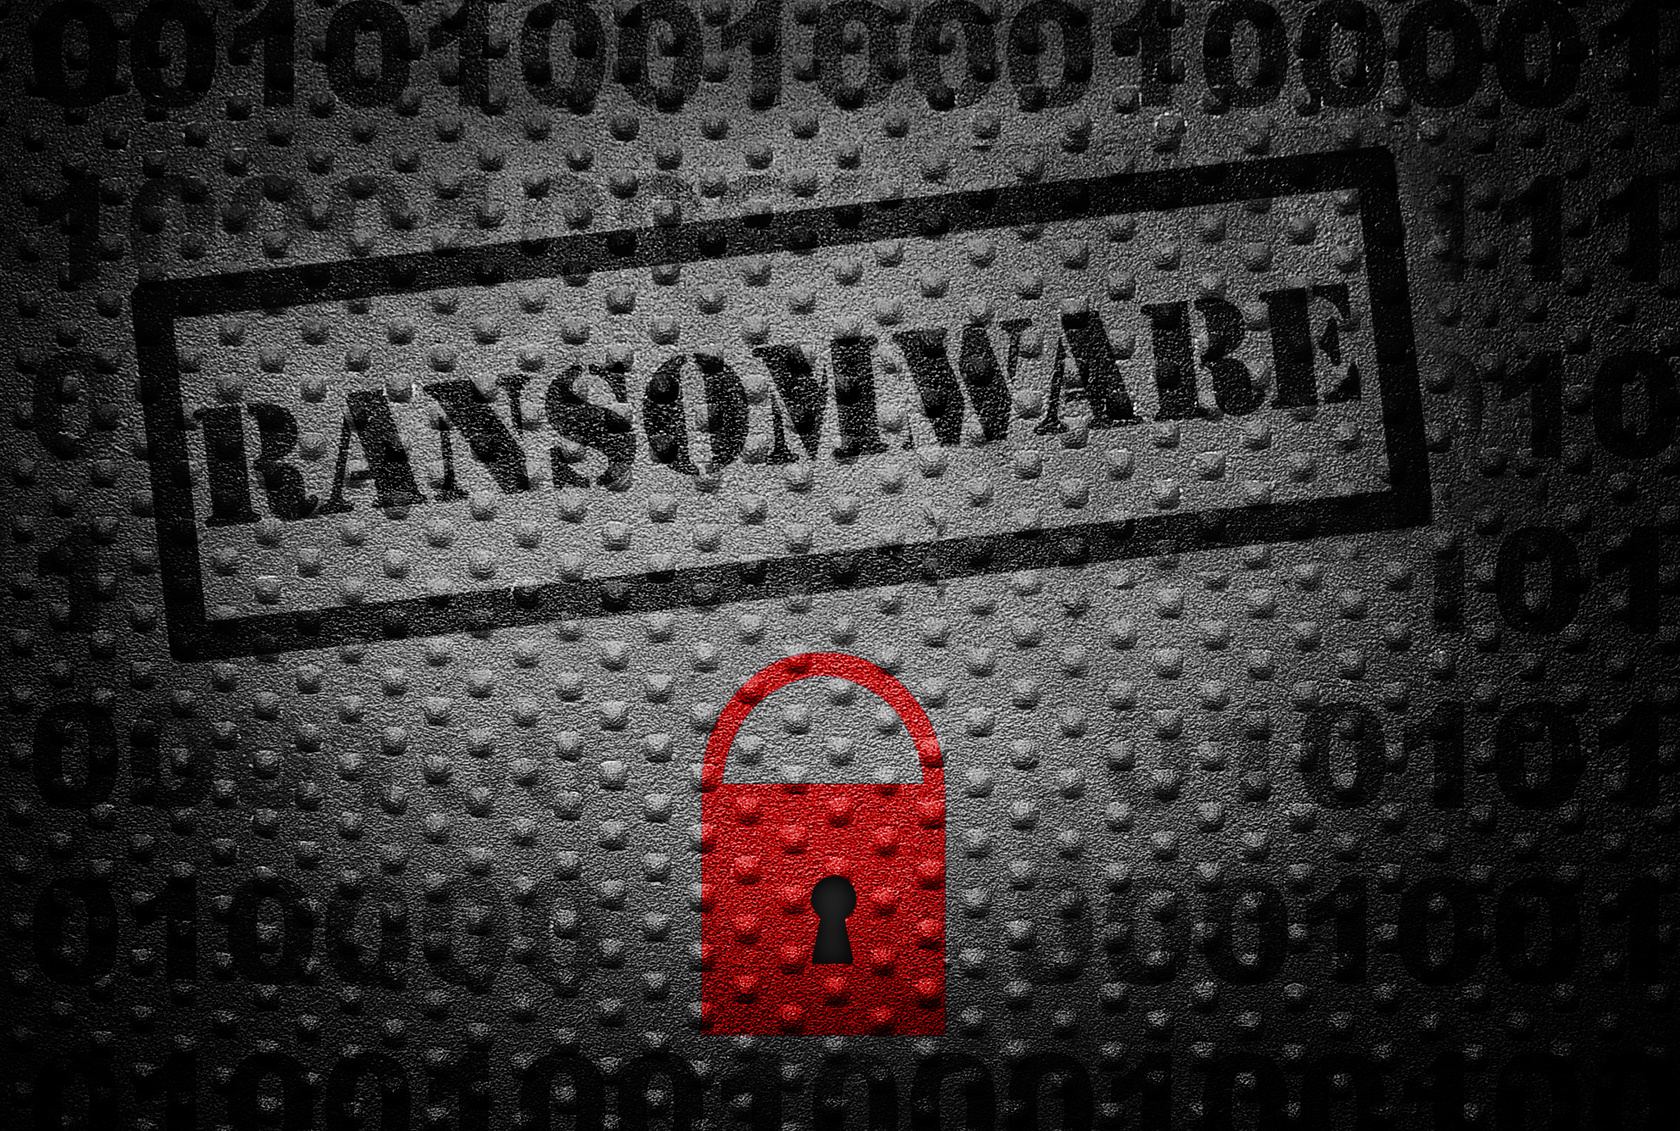 How ransomeware works